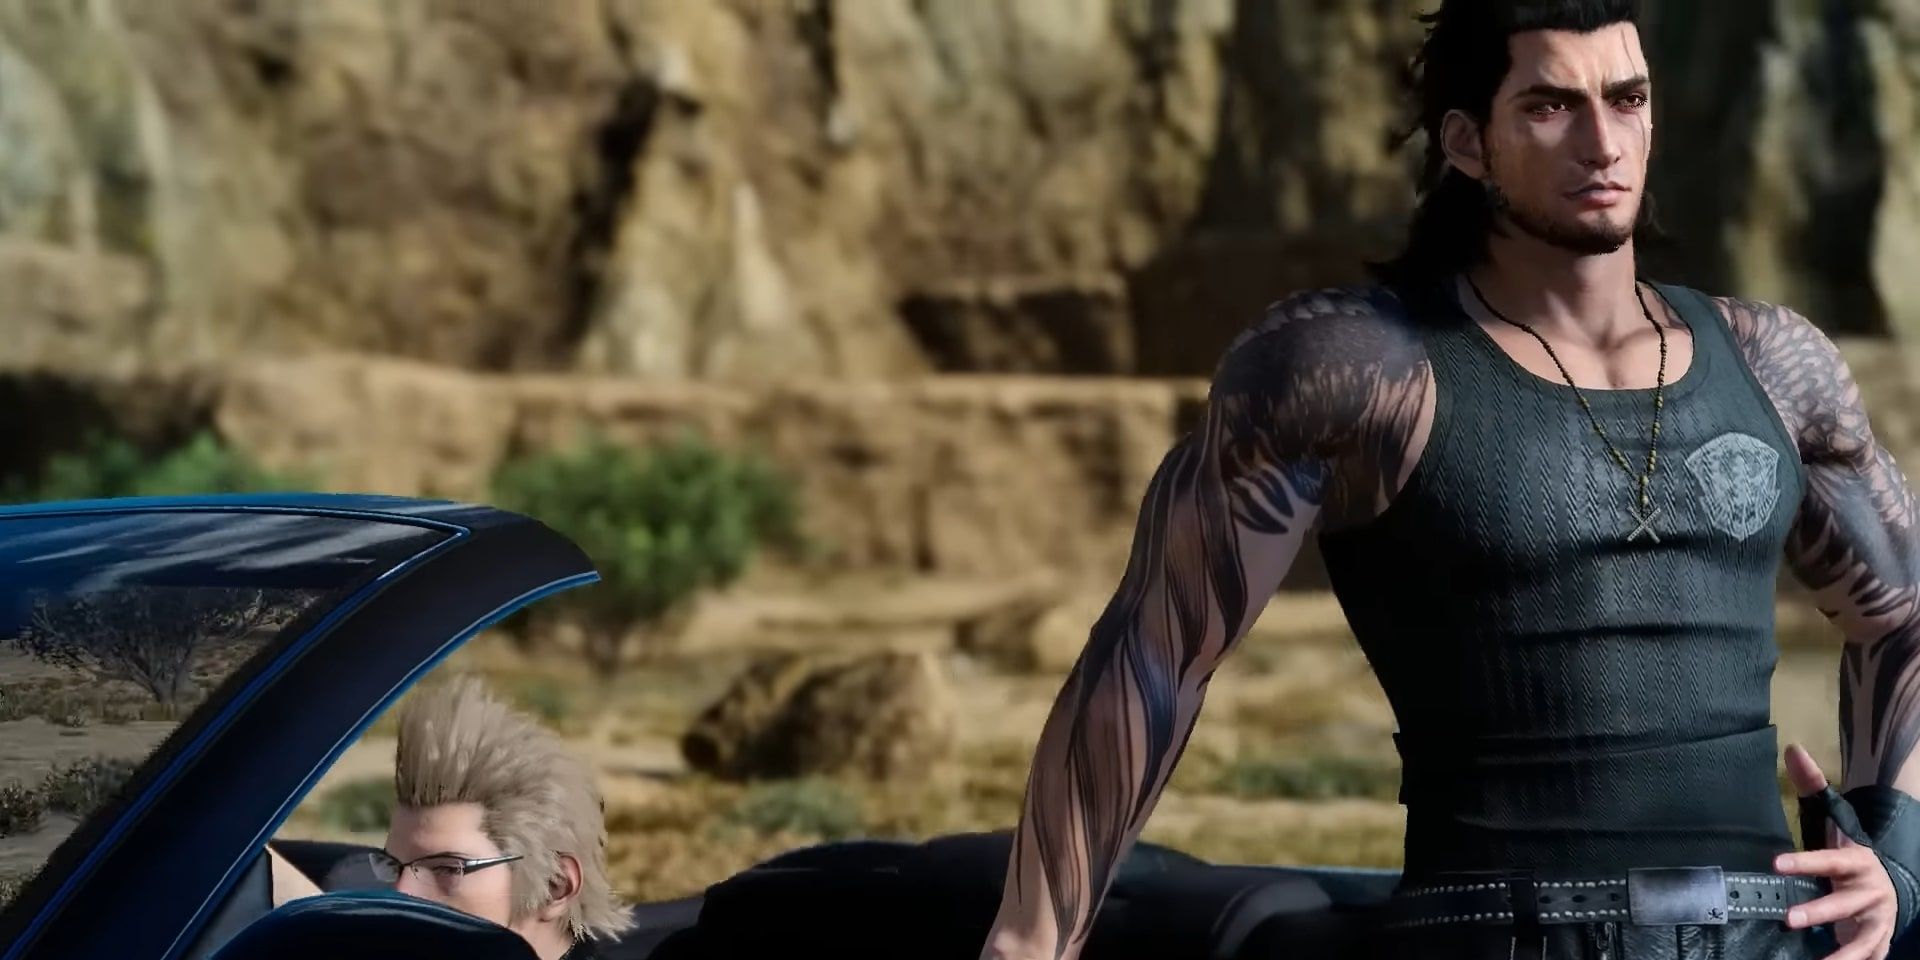  Gladiolus contemplates about the group's problems in Final Fantasy 15